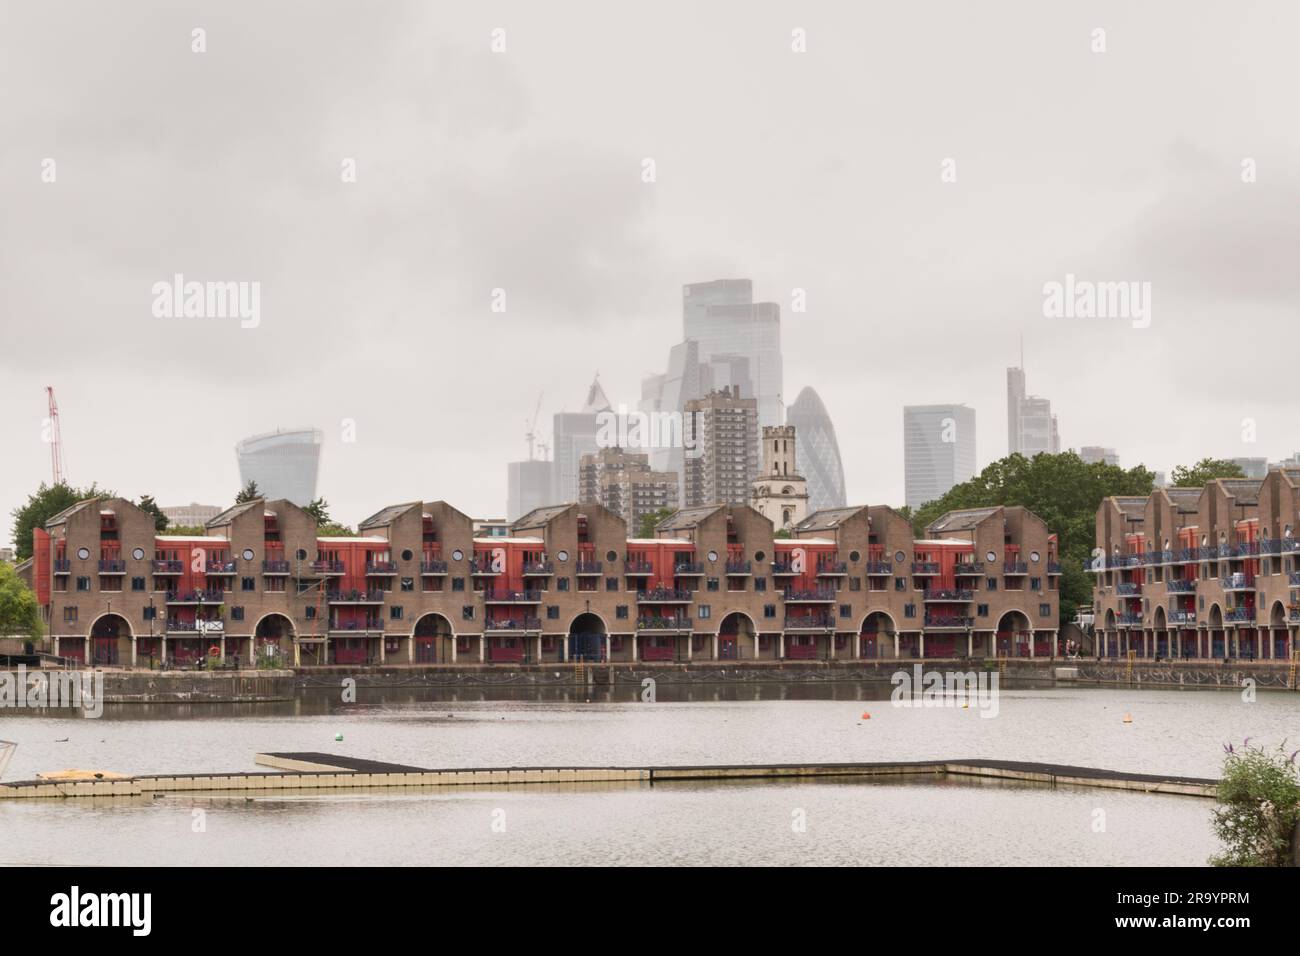 Property on Shadwell Basin, and a grey and gloomy City of London skyline in the background, London, England, U.K. Stock Photo